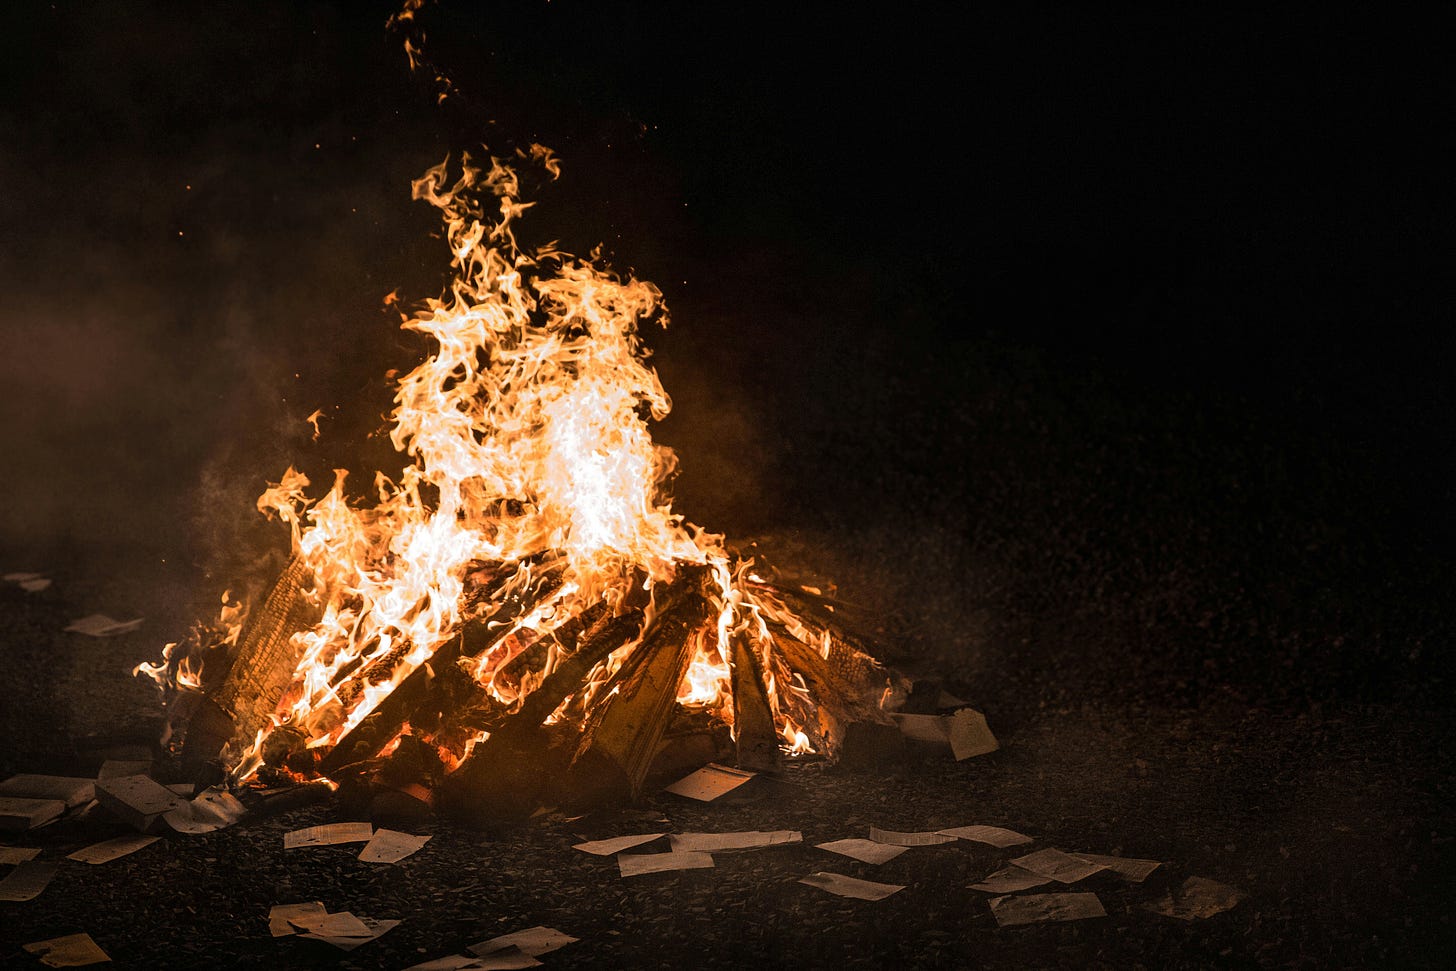 A roaring bonfire at night. In the foreground are scattered papers.